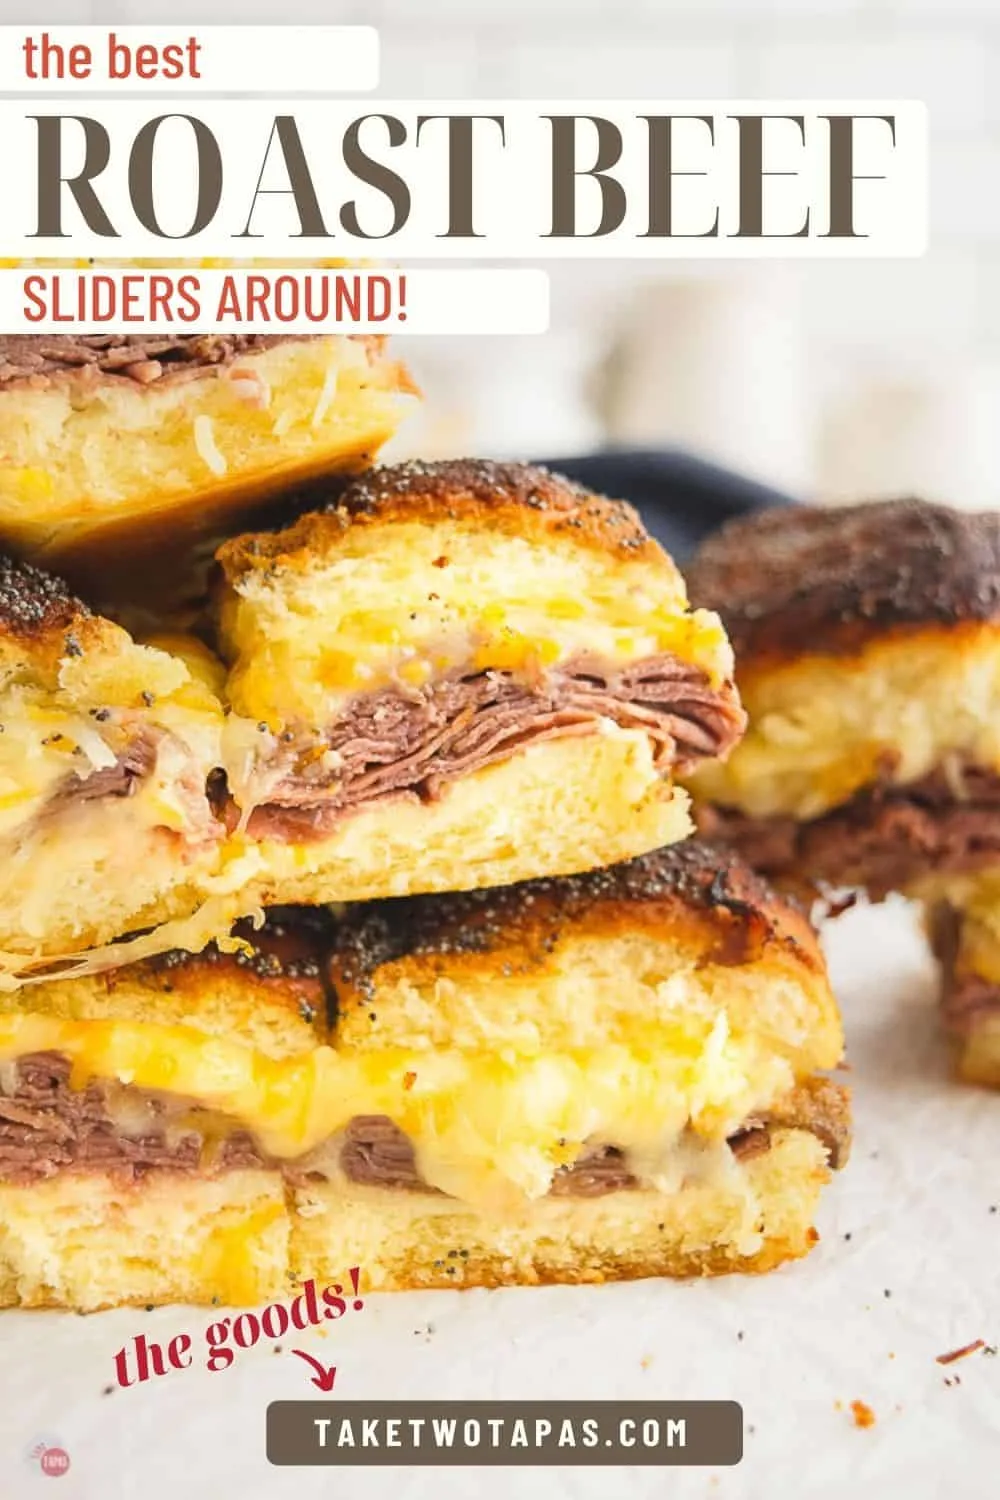 sliders with text "the best roast beef sliders around"